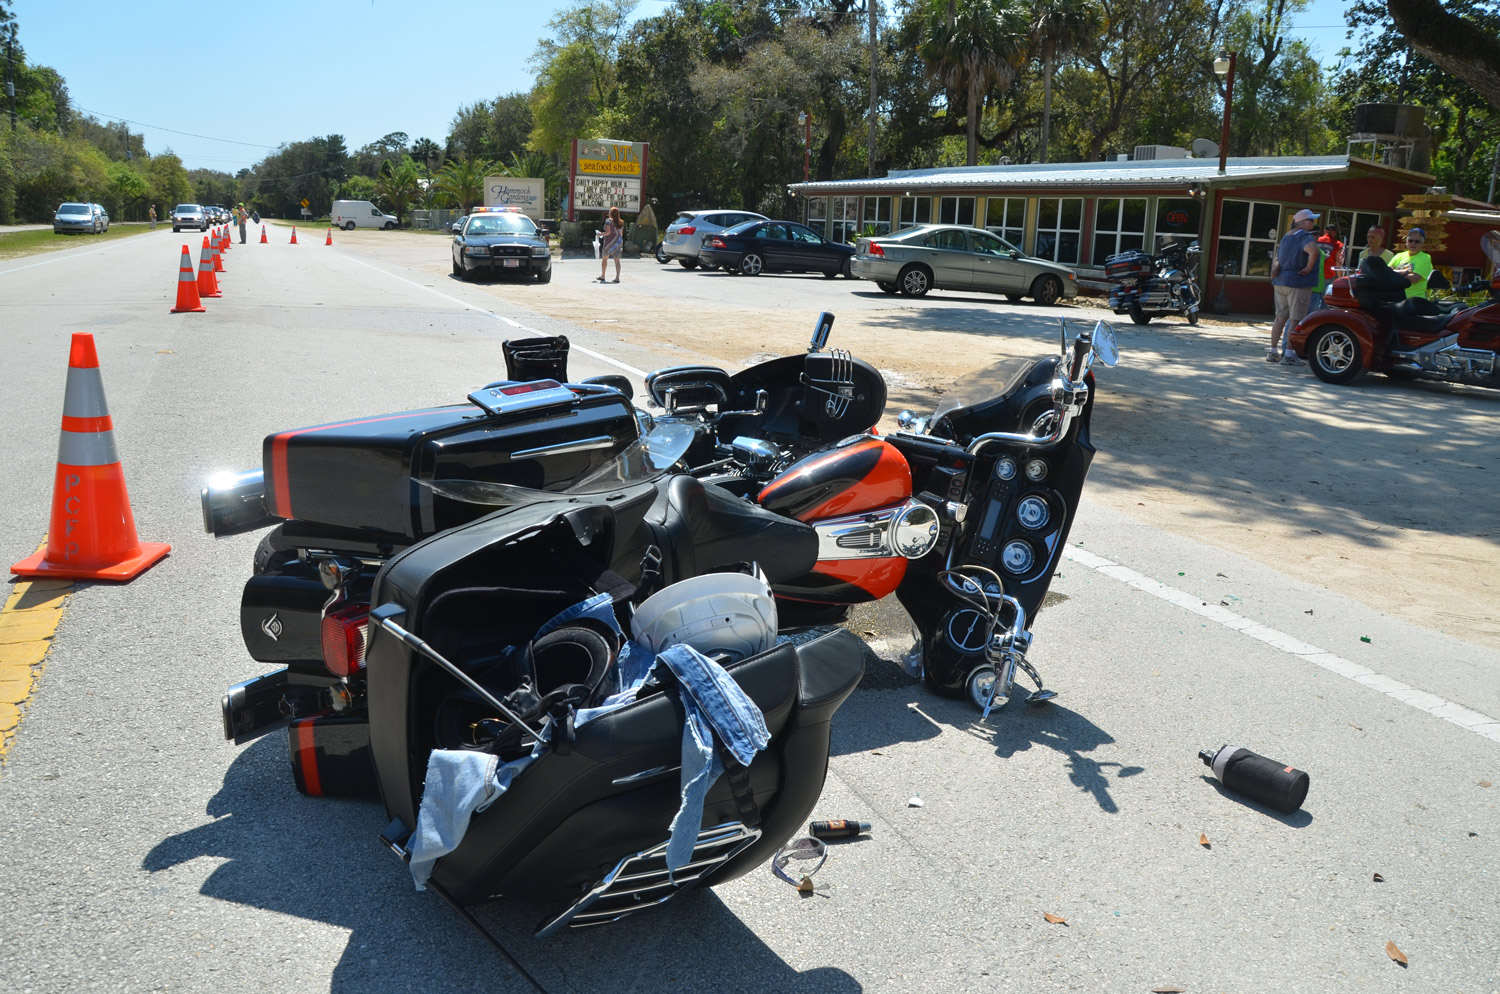 Sixth Serious Bike Week Wreck, on A1A, Sends 2 to Hospital After BMW